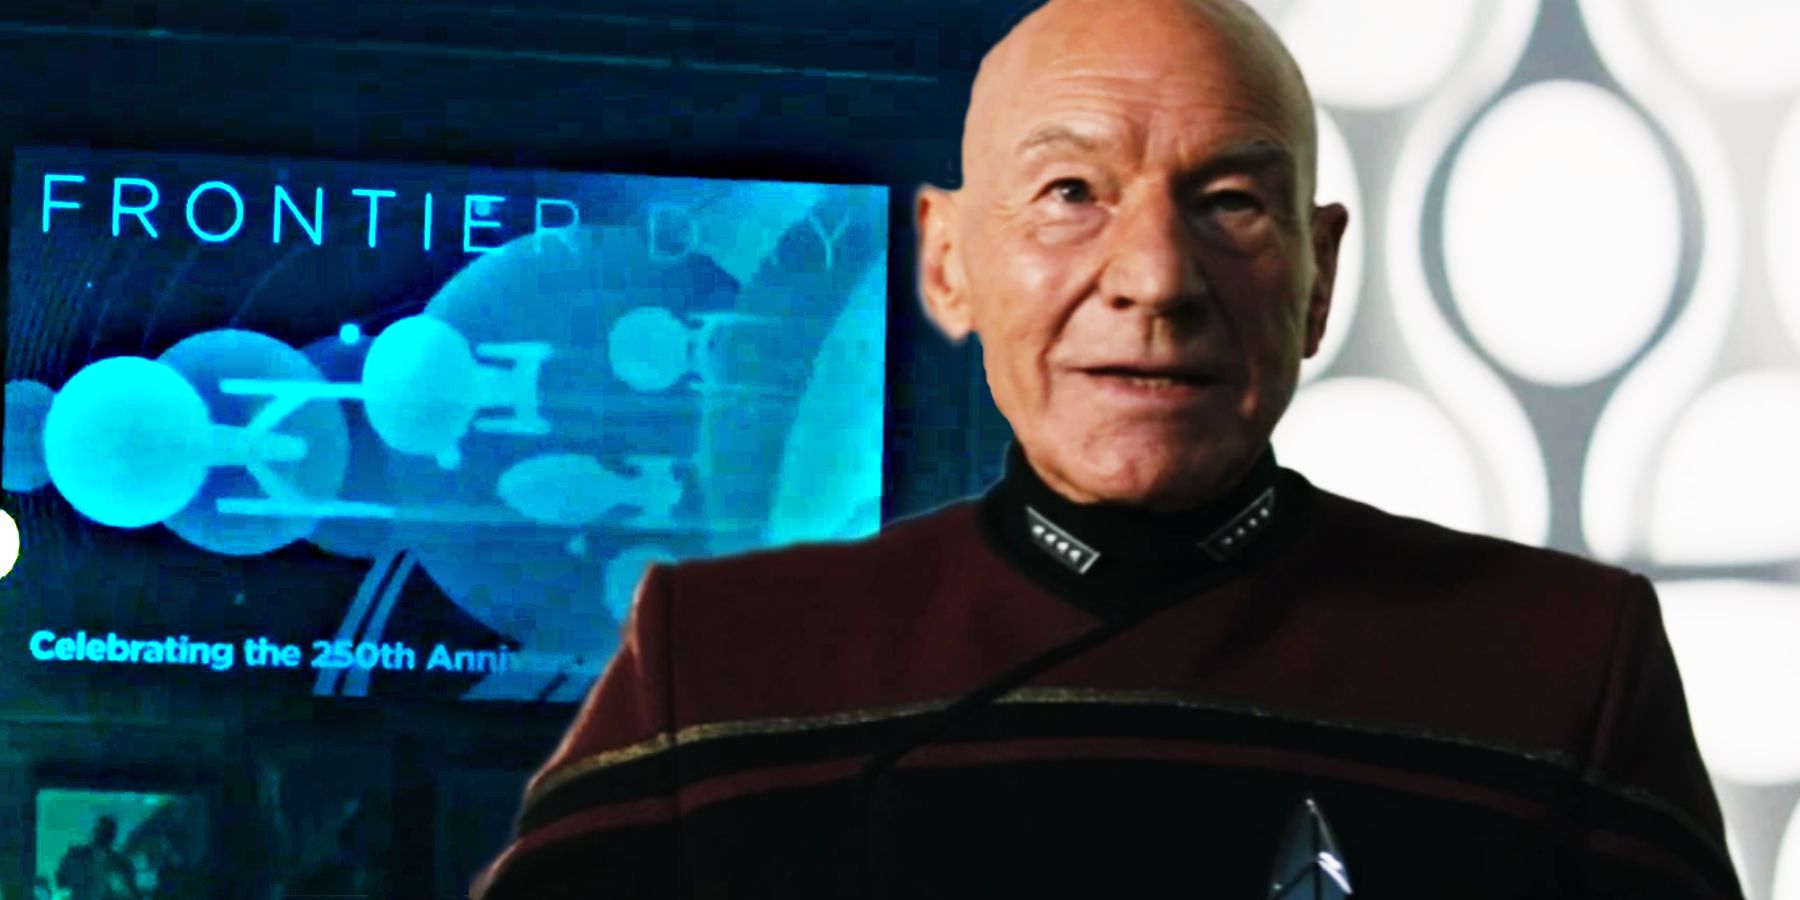 Patrick Stewart as Jean-Luc Picard in Star Trek Picard and the Frontier Day poster